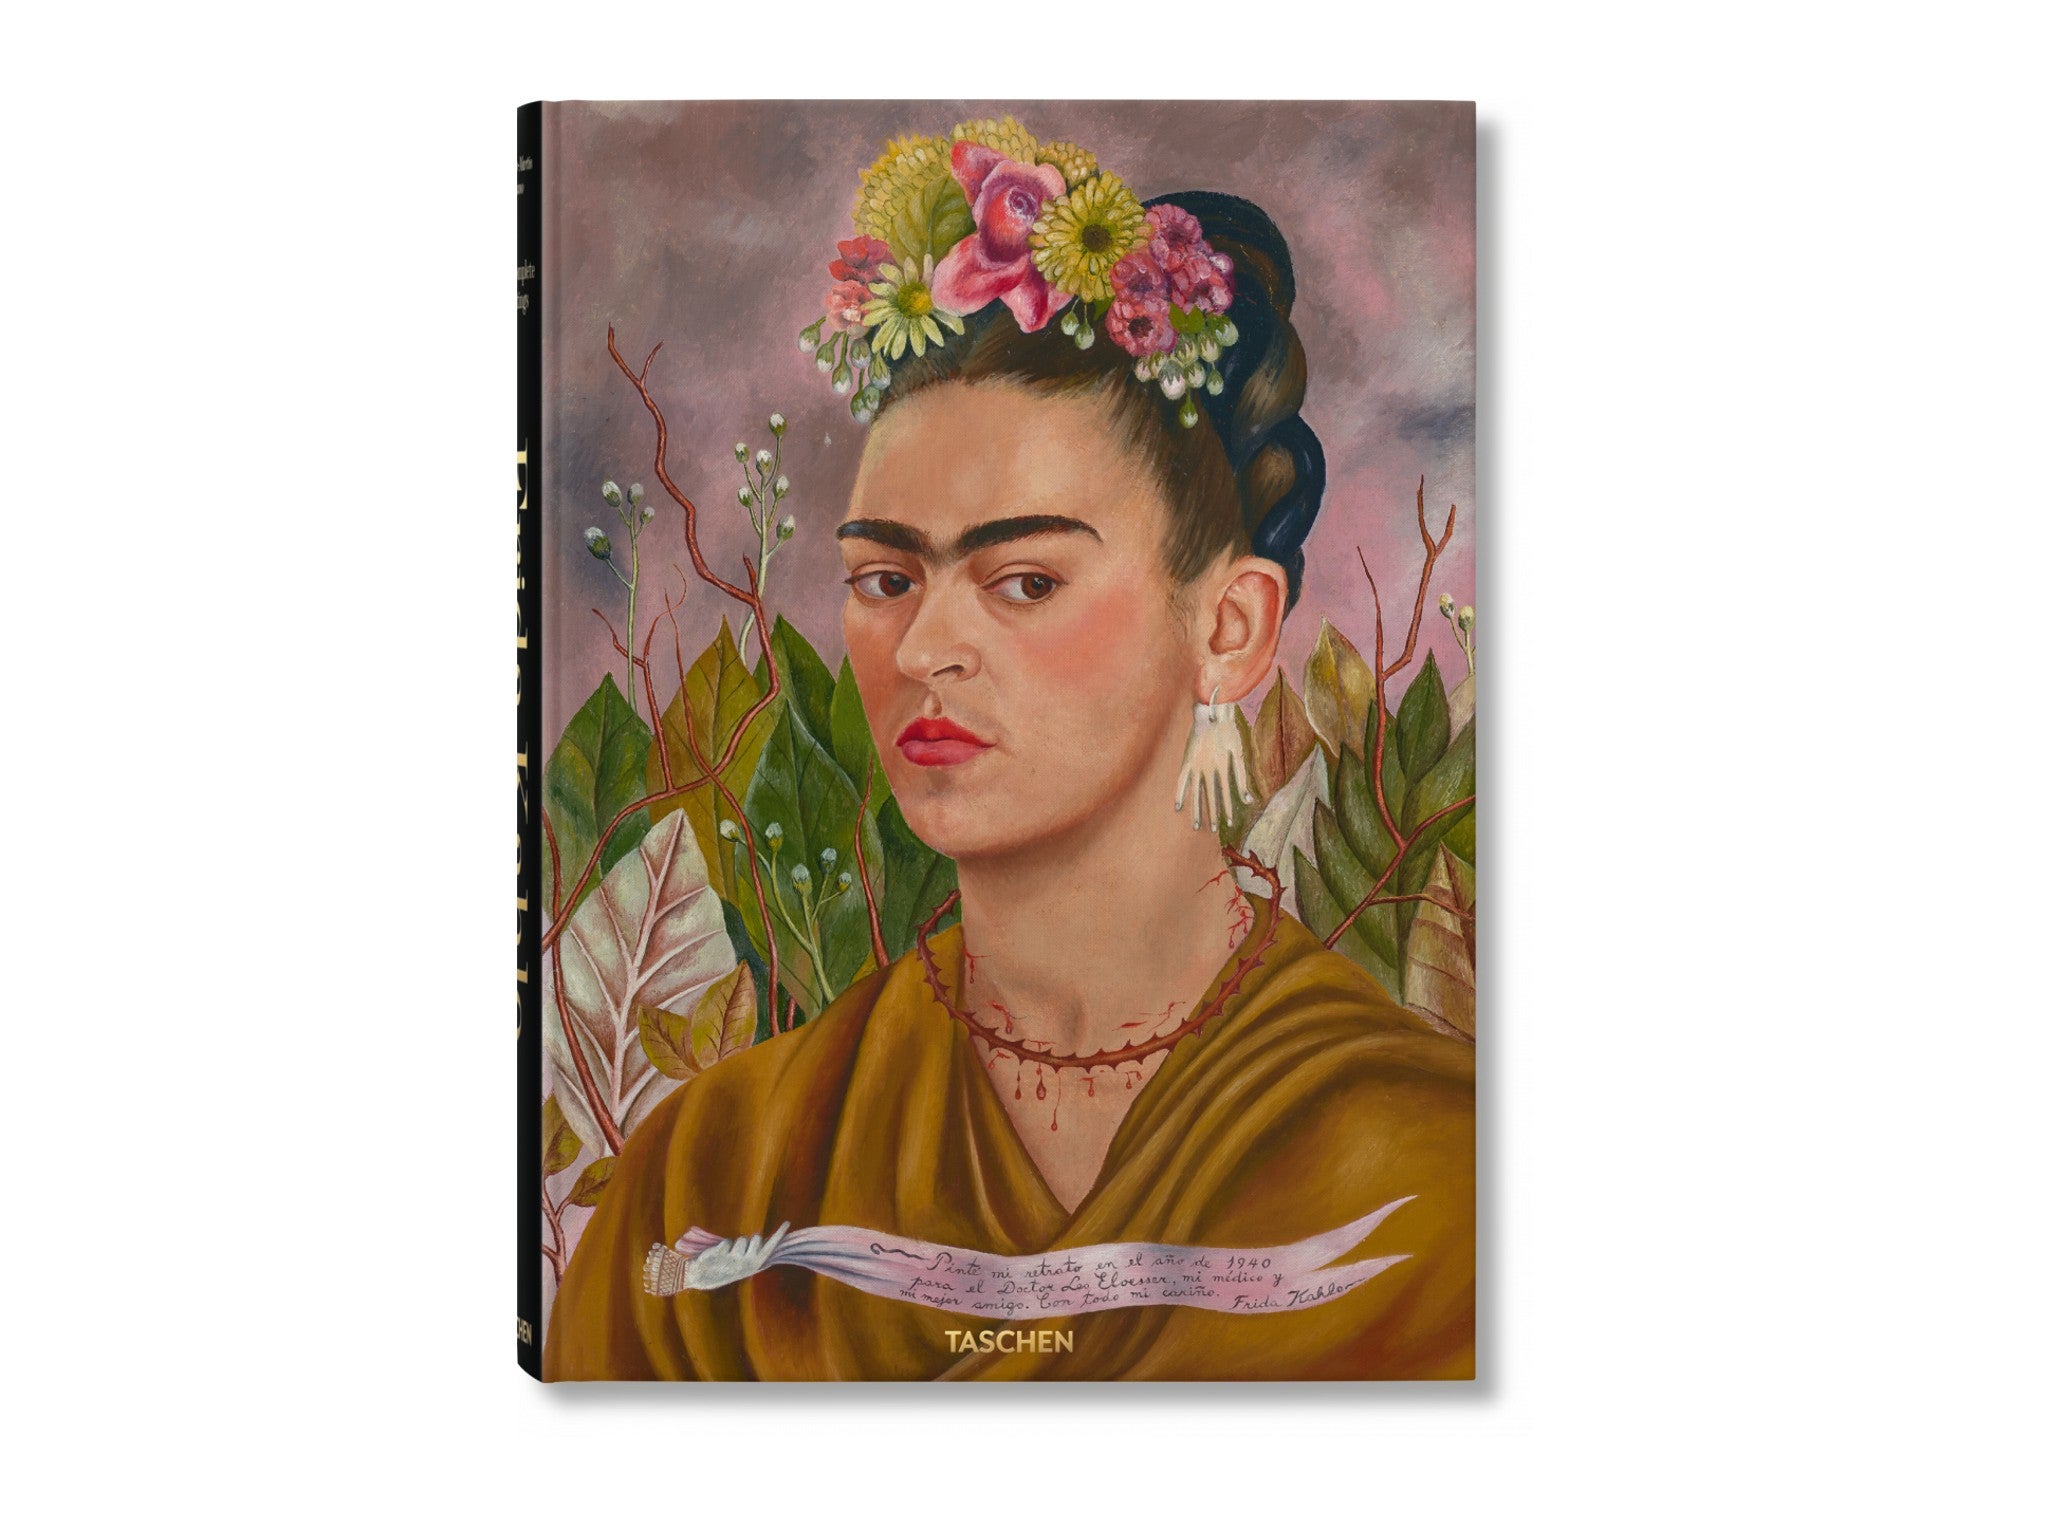 Frida Kahlo- The Complete Paintings’ by Andrea Kettenmann and Luis-Martín Lozano indybest.jpg